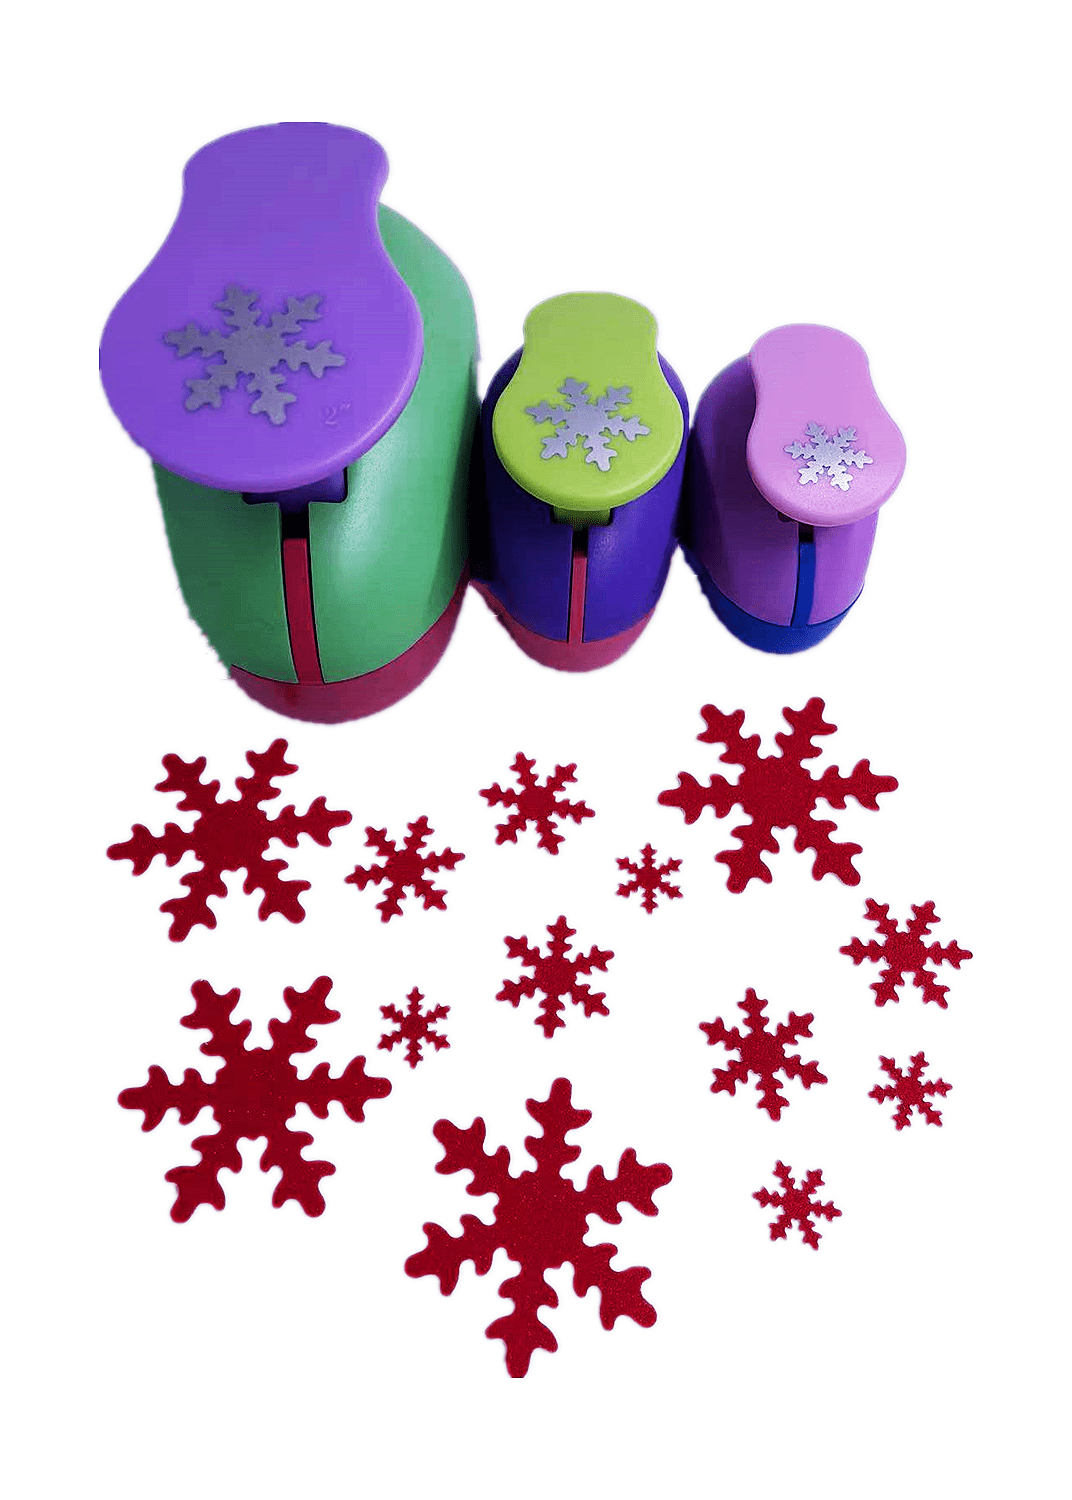 R H lifestyle Snowflake Design 1 Fancy Anywhere Paper Punch  DIY Scrapbooking Craft Tool Handmade Punches & Punching Machines - MANUAL